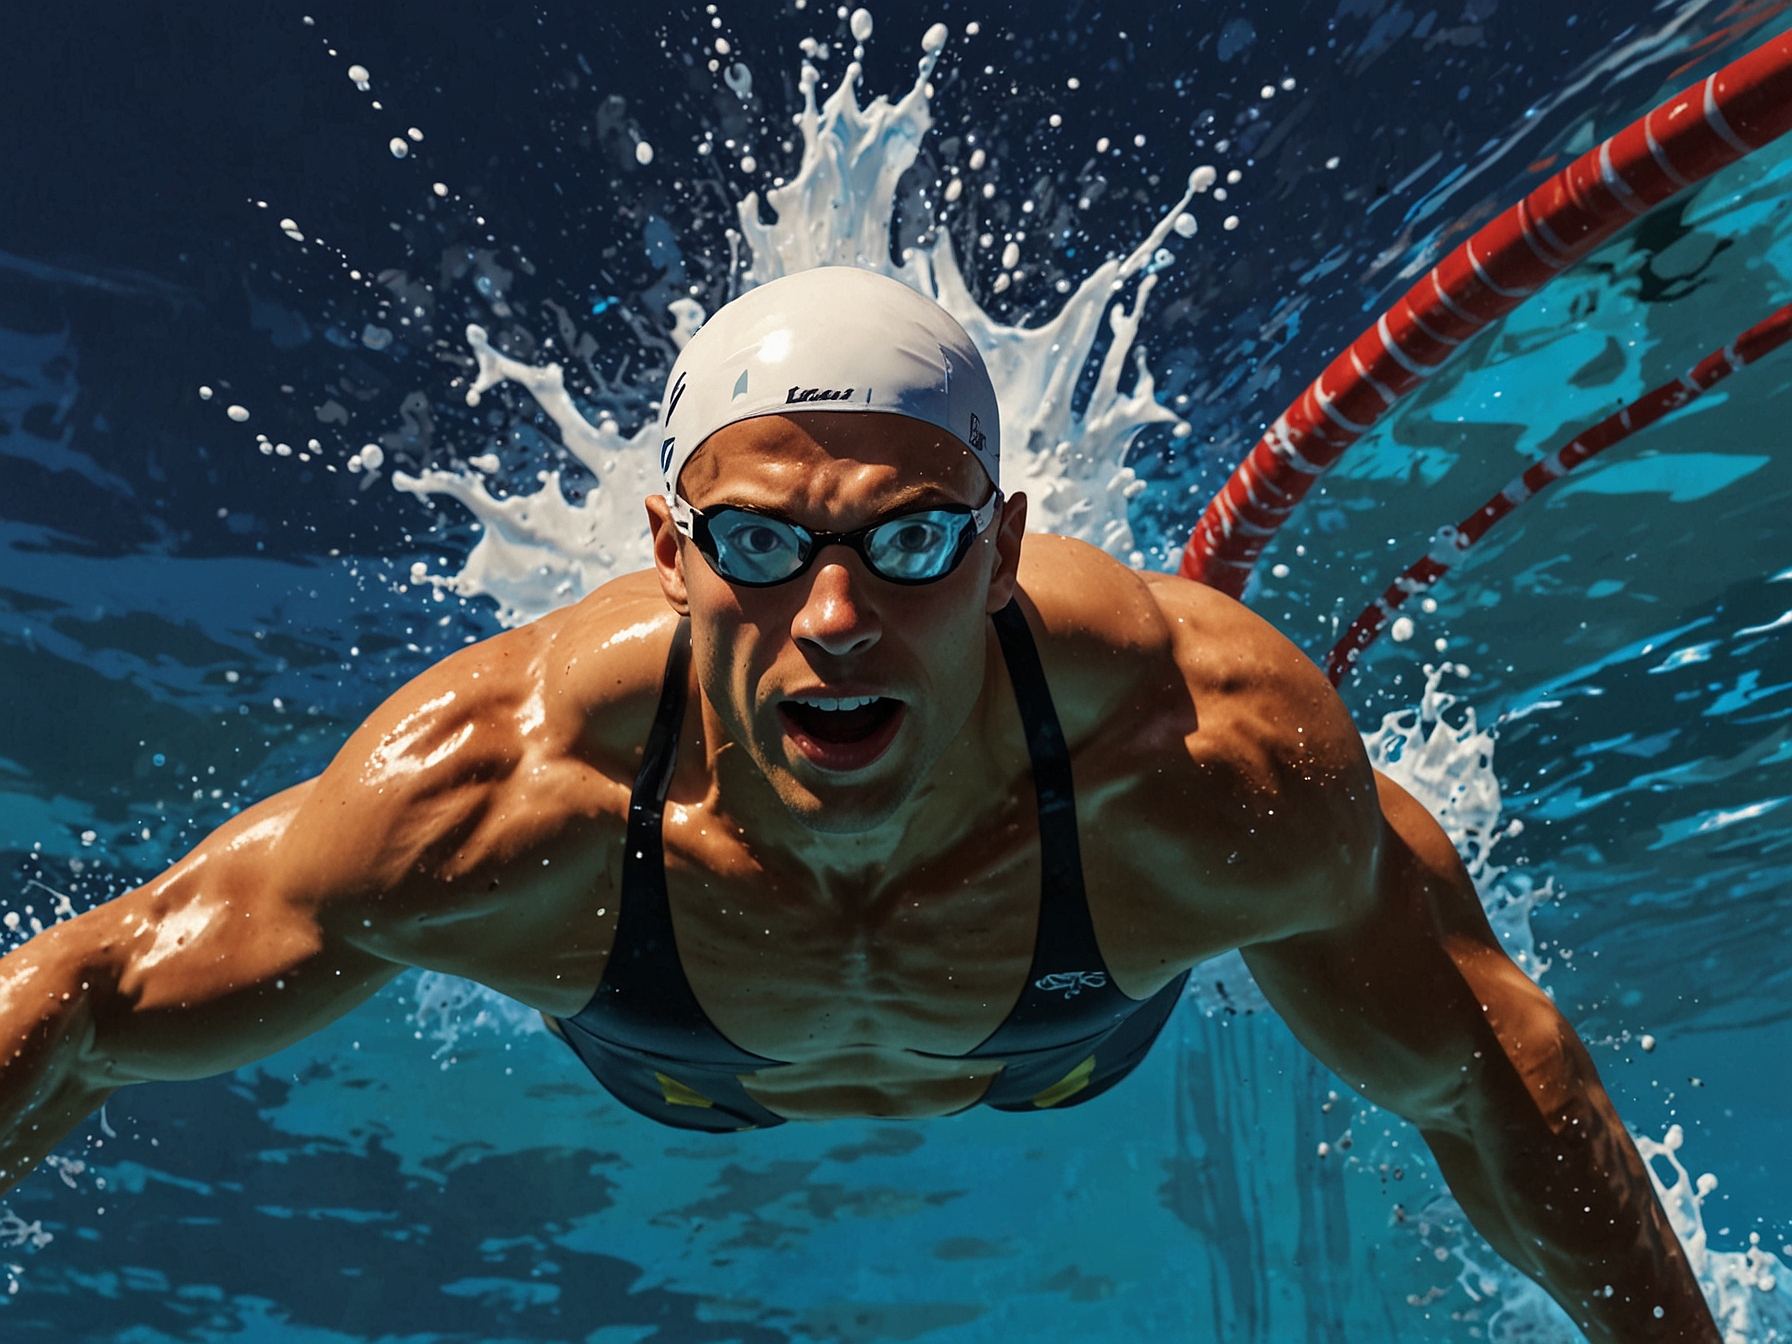 An action shot of Matt Grevers furiously swimming in a butterfly stroke, his powerful form and technique on full display as he competes, inspiring both fans and fellow athletes at the swimming trials.